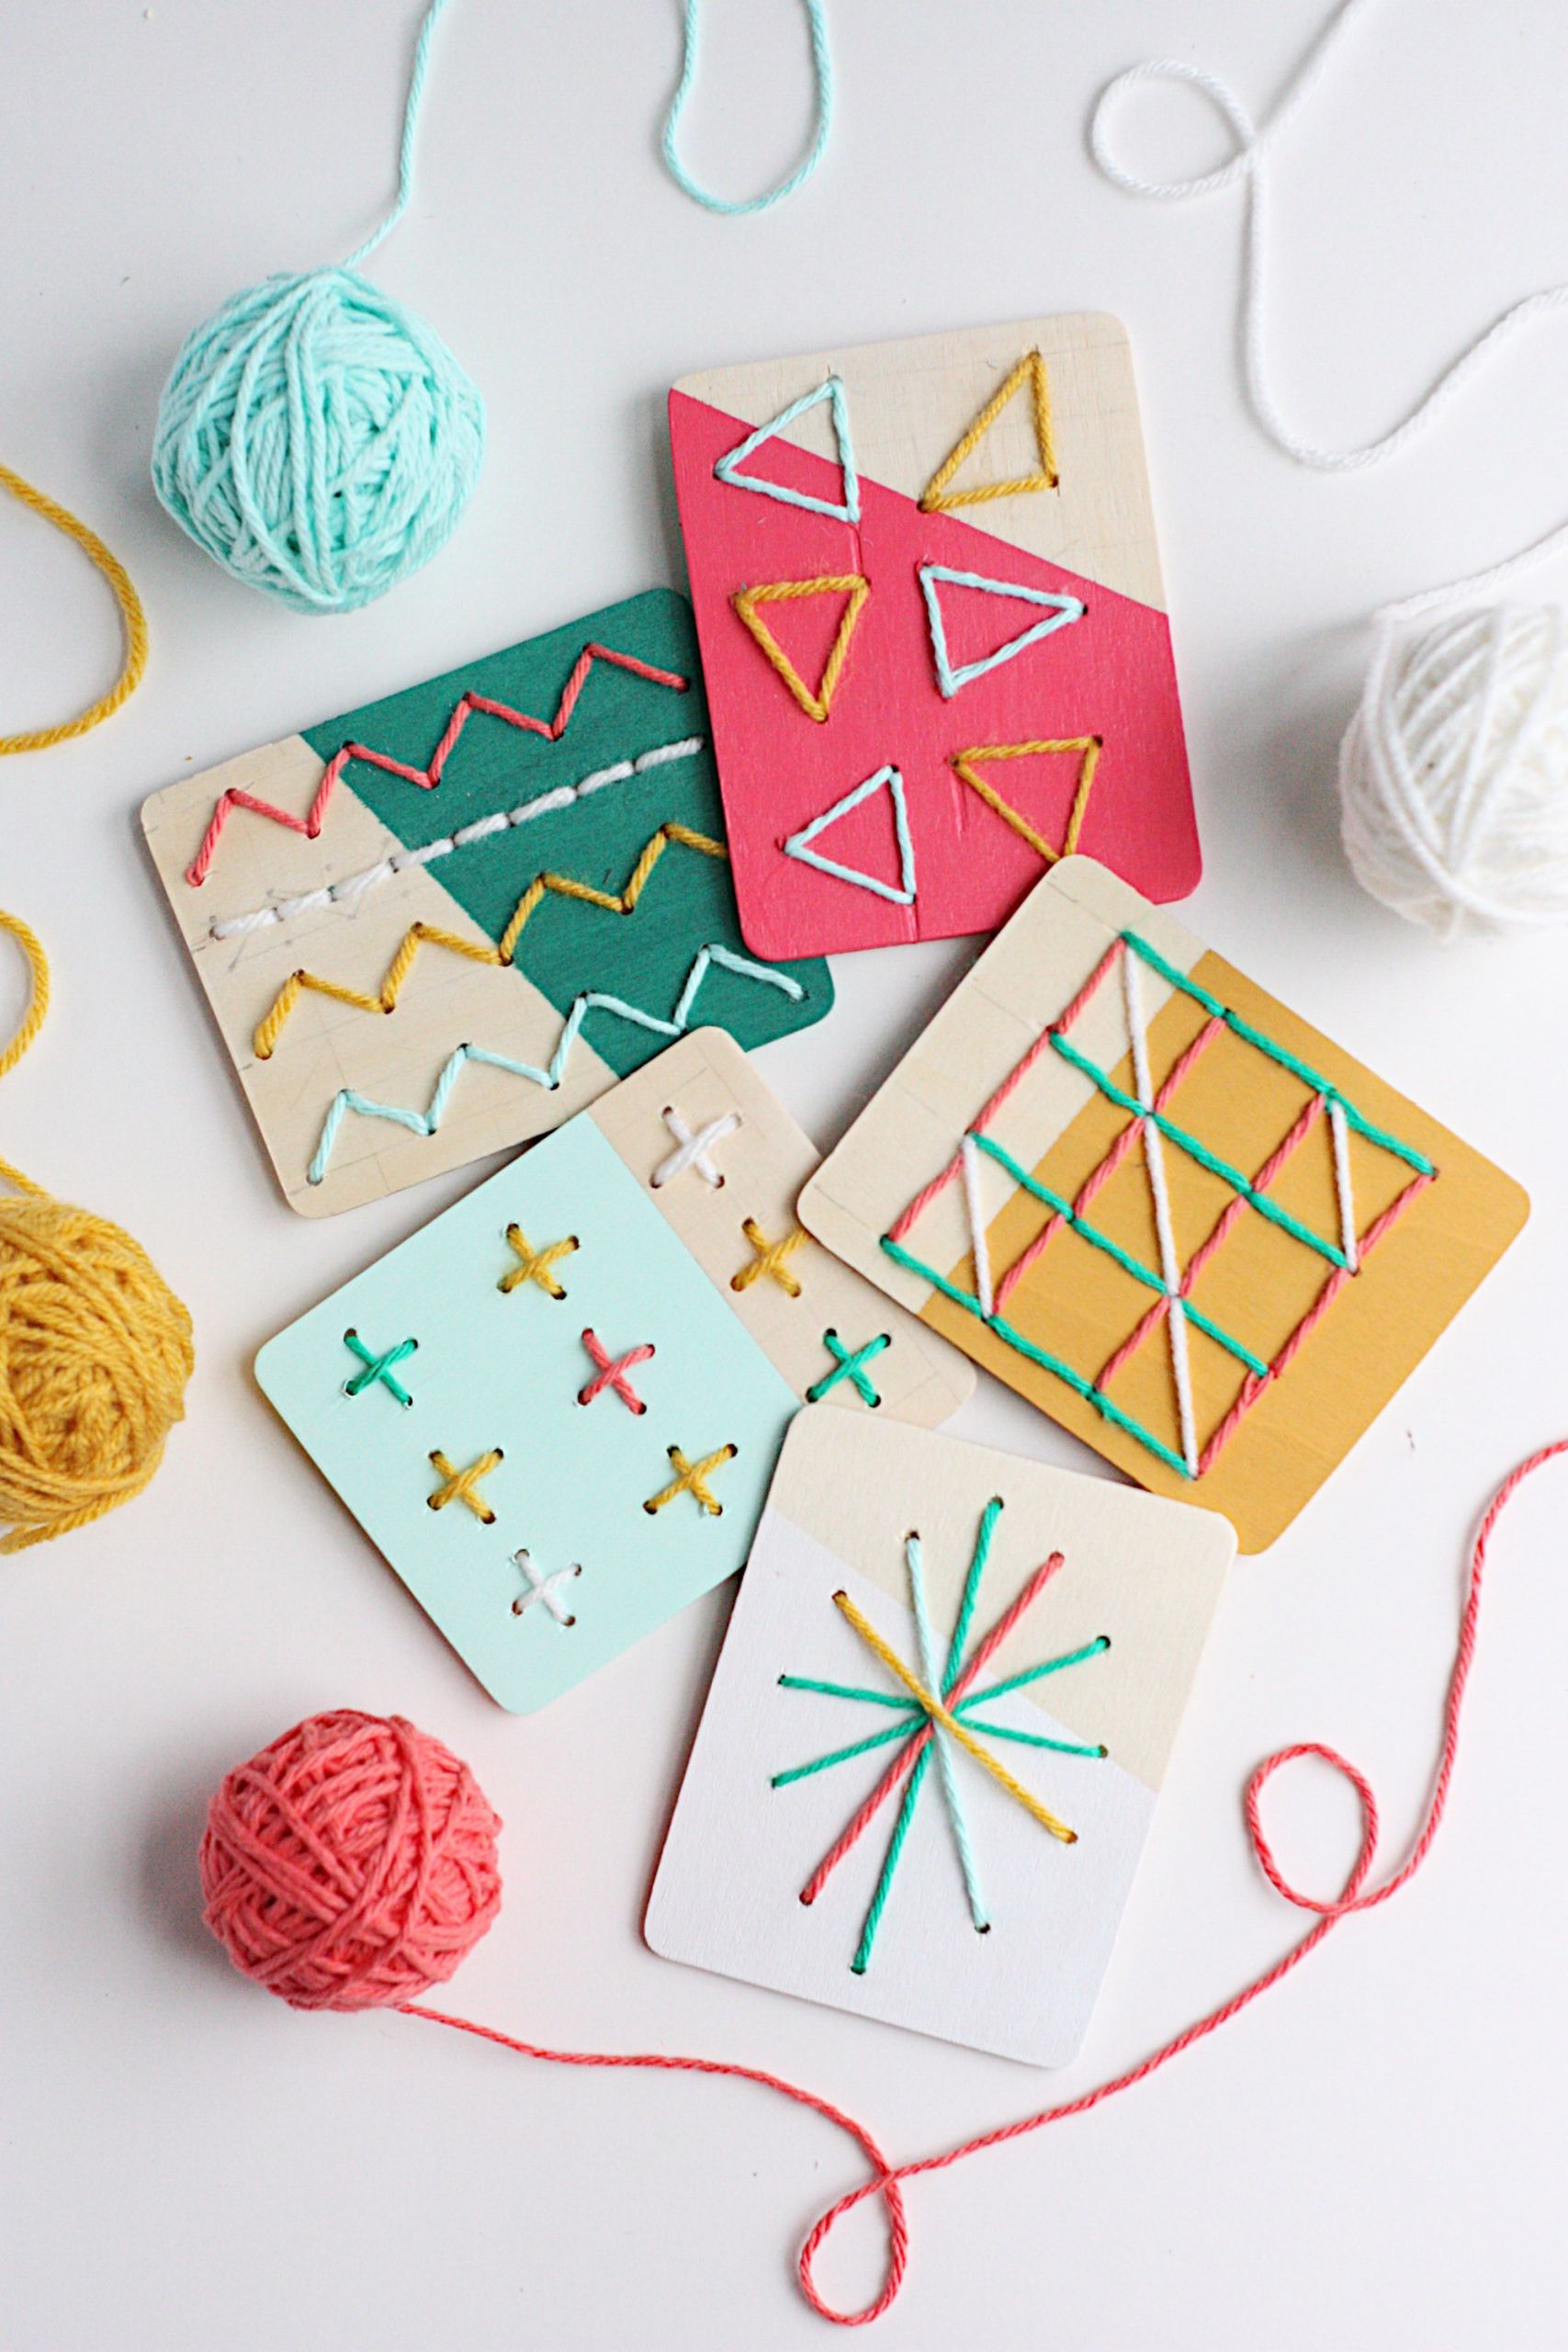 DIY Kids Projects
 11 DIY Yarn Crafts That Will Amaze Your Kids Shelterness